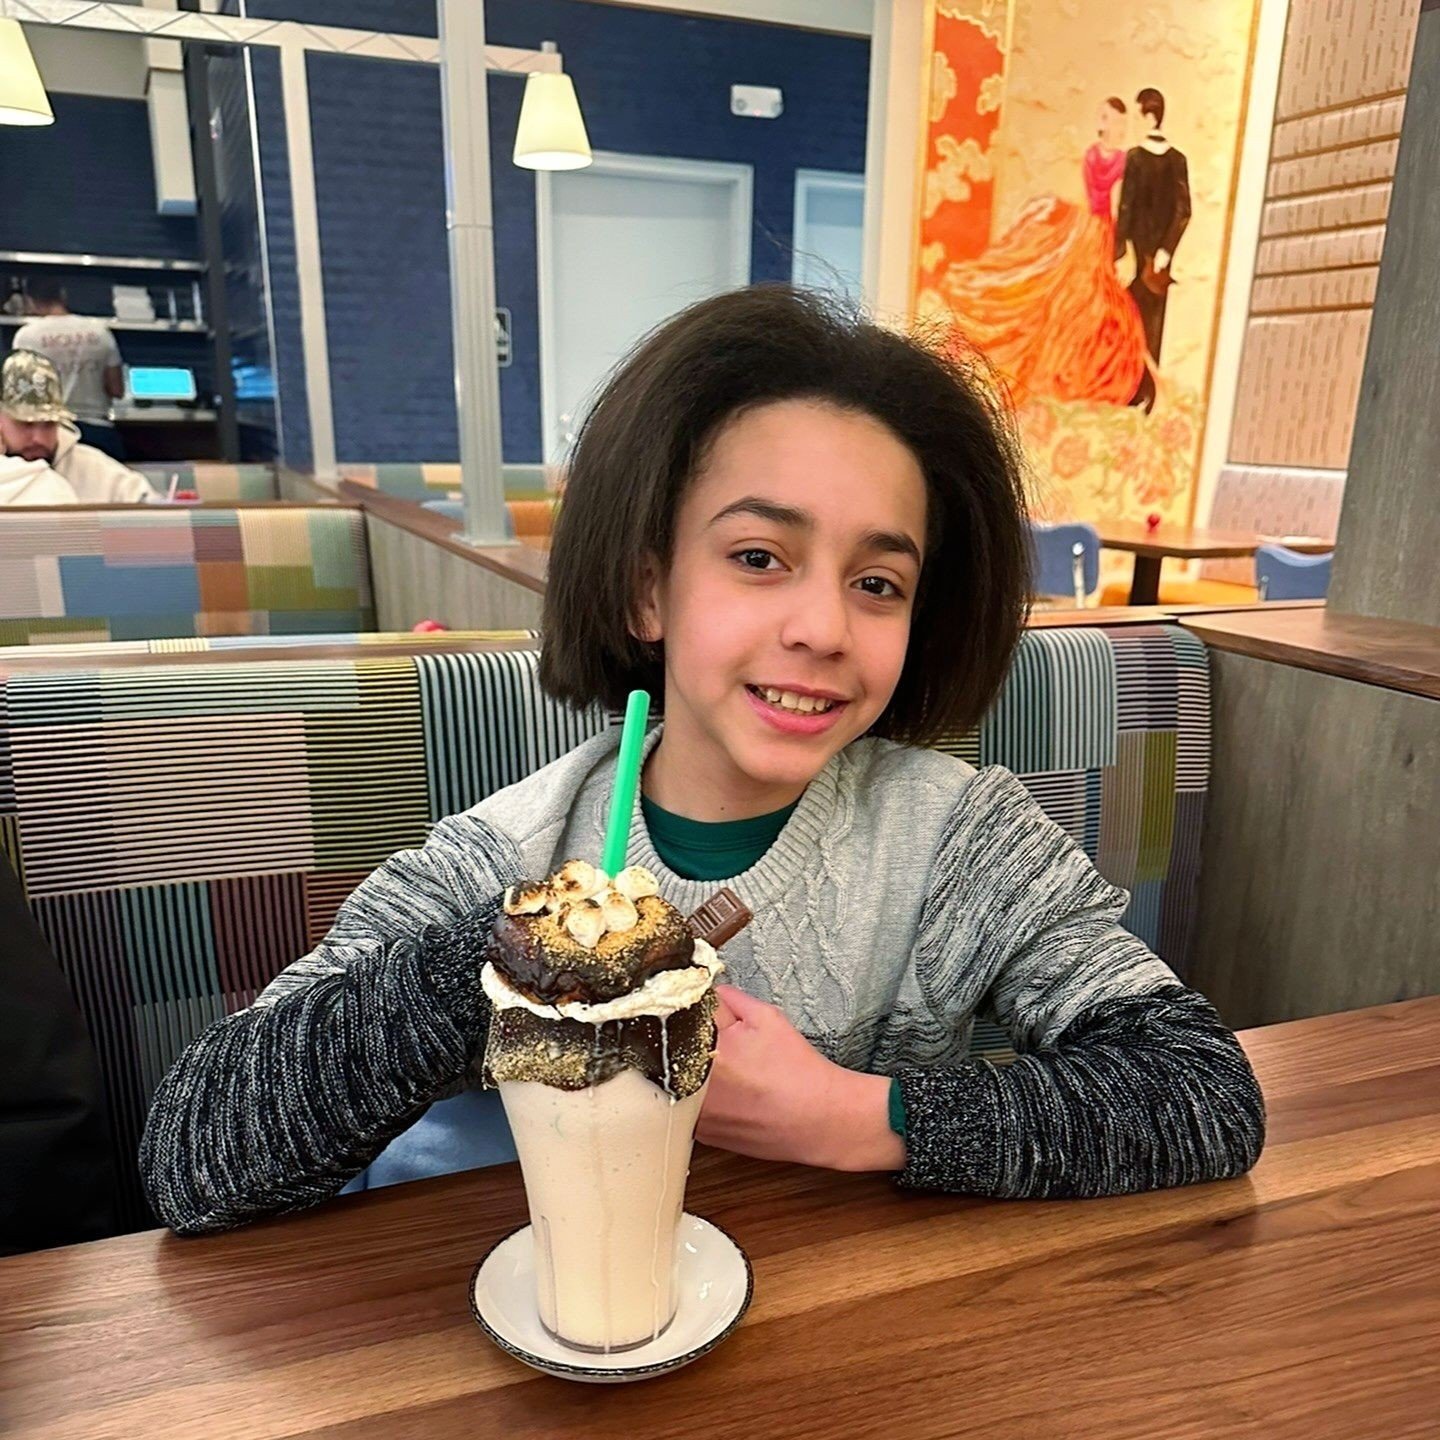 ⁠You will be all smiles too when you order a Campfire Shake! 🍫❤️&zwj;🔥⁠
⁠
📷 @nyc_mami_on_the_move_pics⁠
.⁠
.⁠
.⁠
#atcdiner #aroundtheclockdiner #diner #NJdiner #americandream #americandreammall #newopenings #newopeningsnj #breakfast #njdining #201